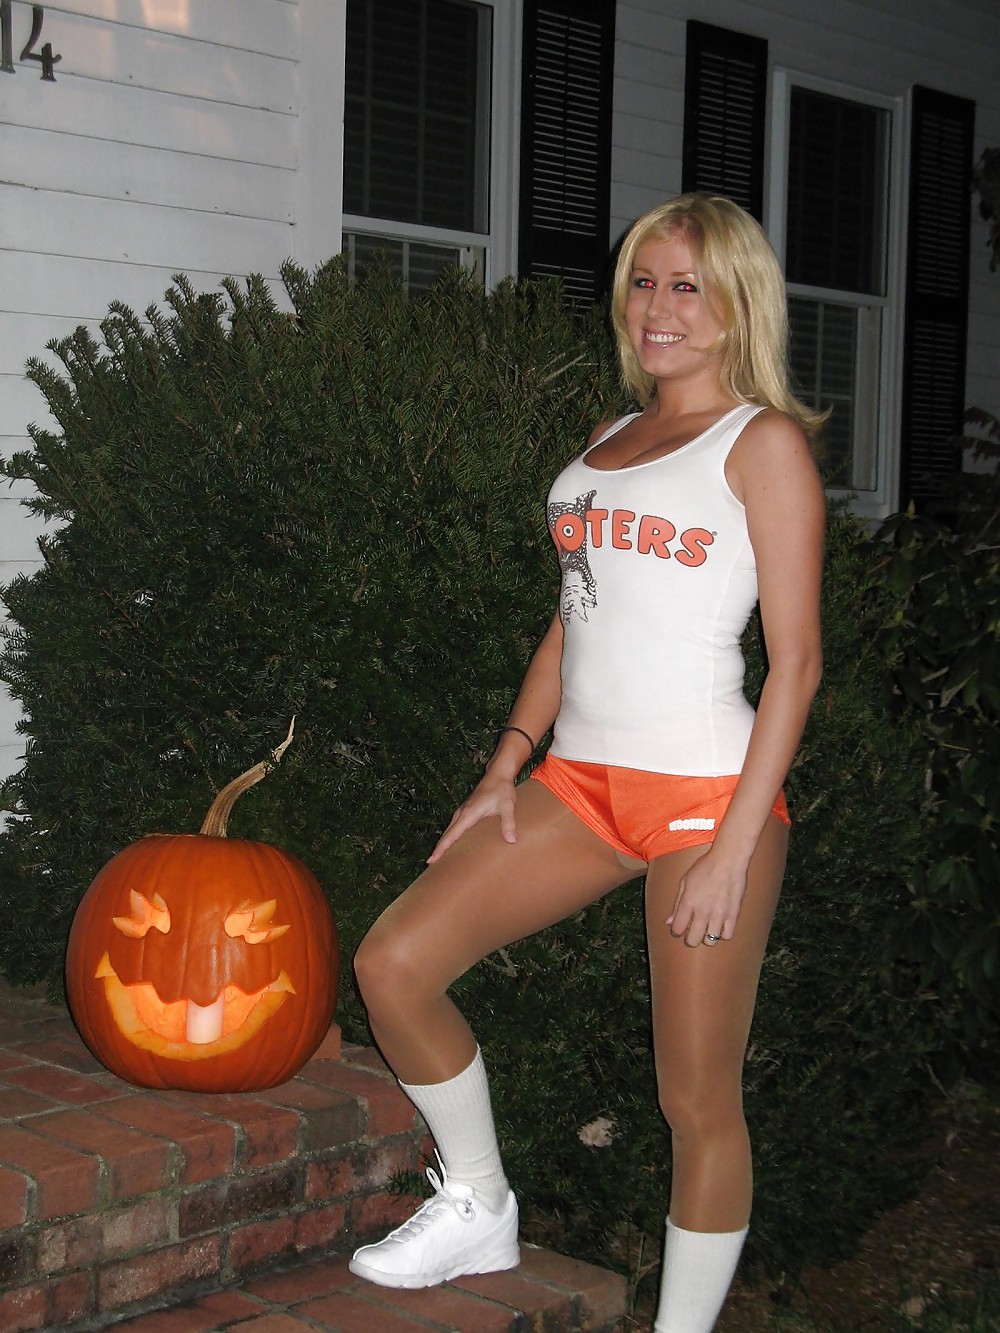 Pantyhose Girls of Hooters #23092968